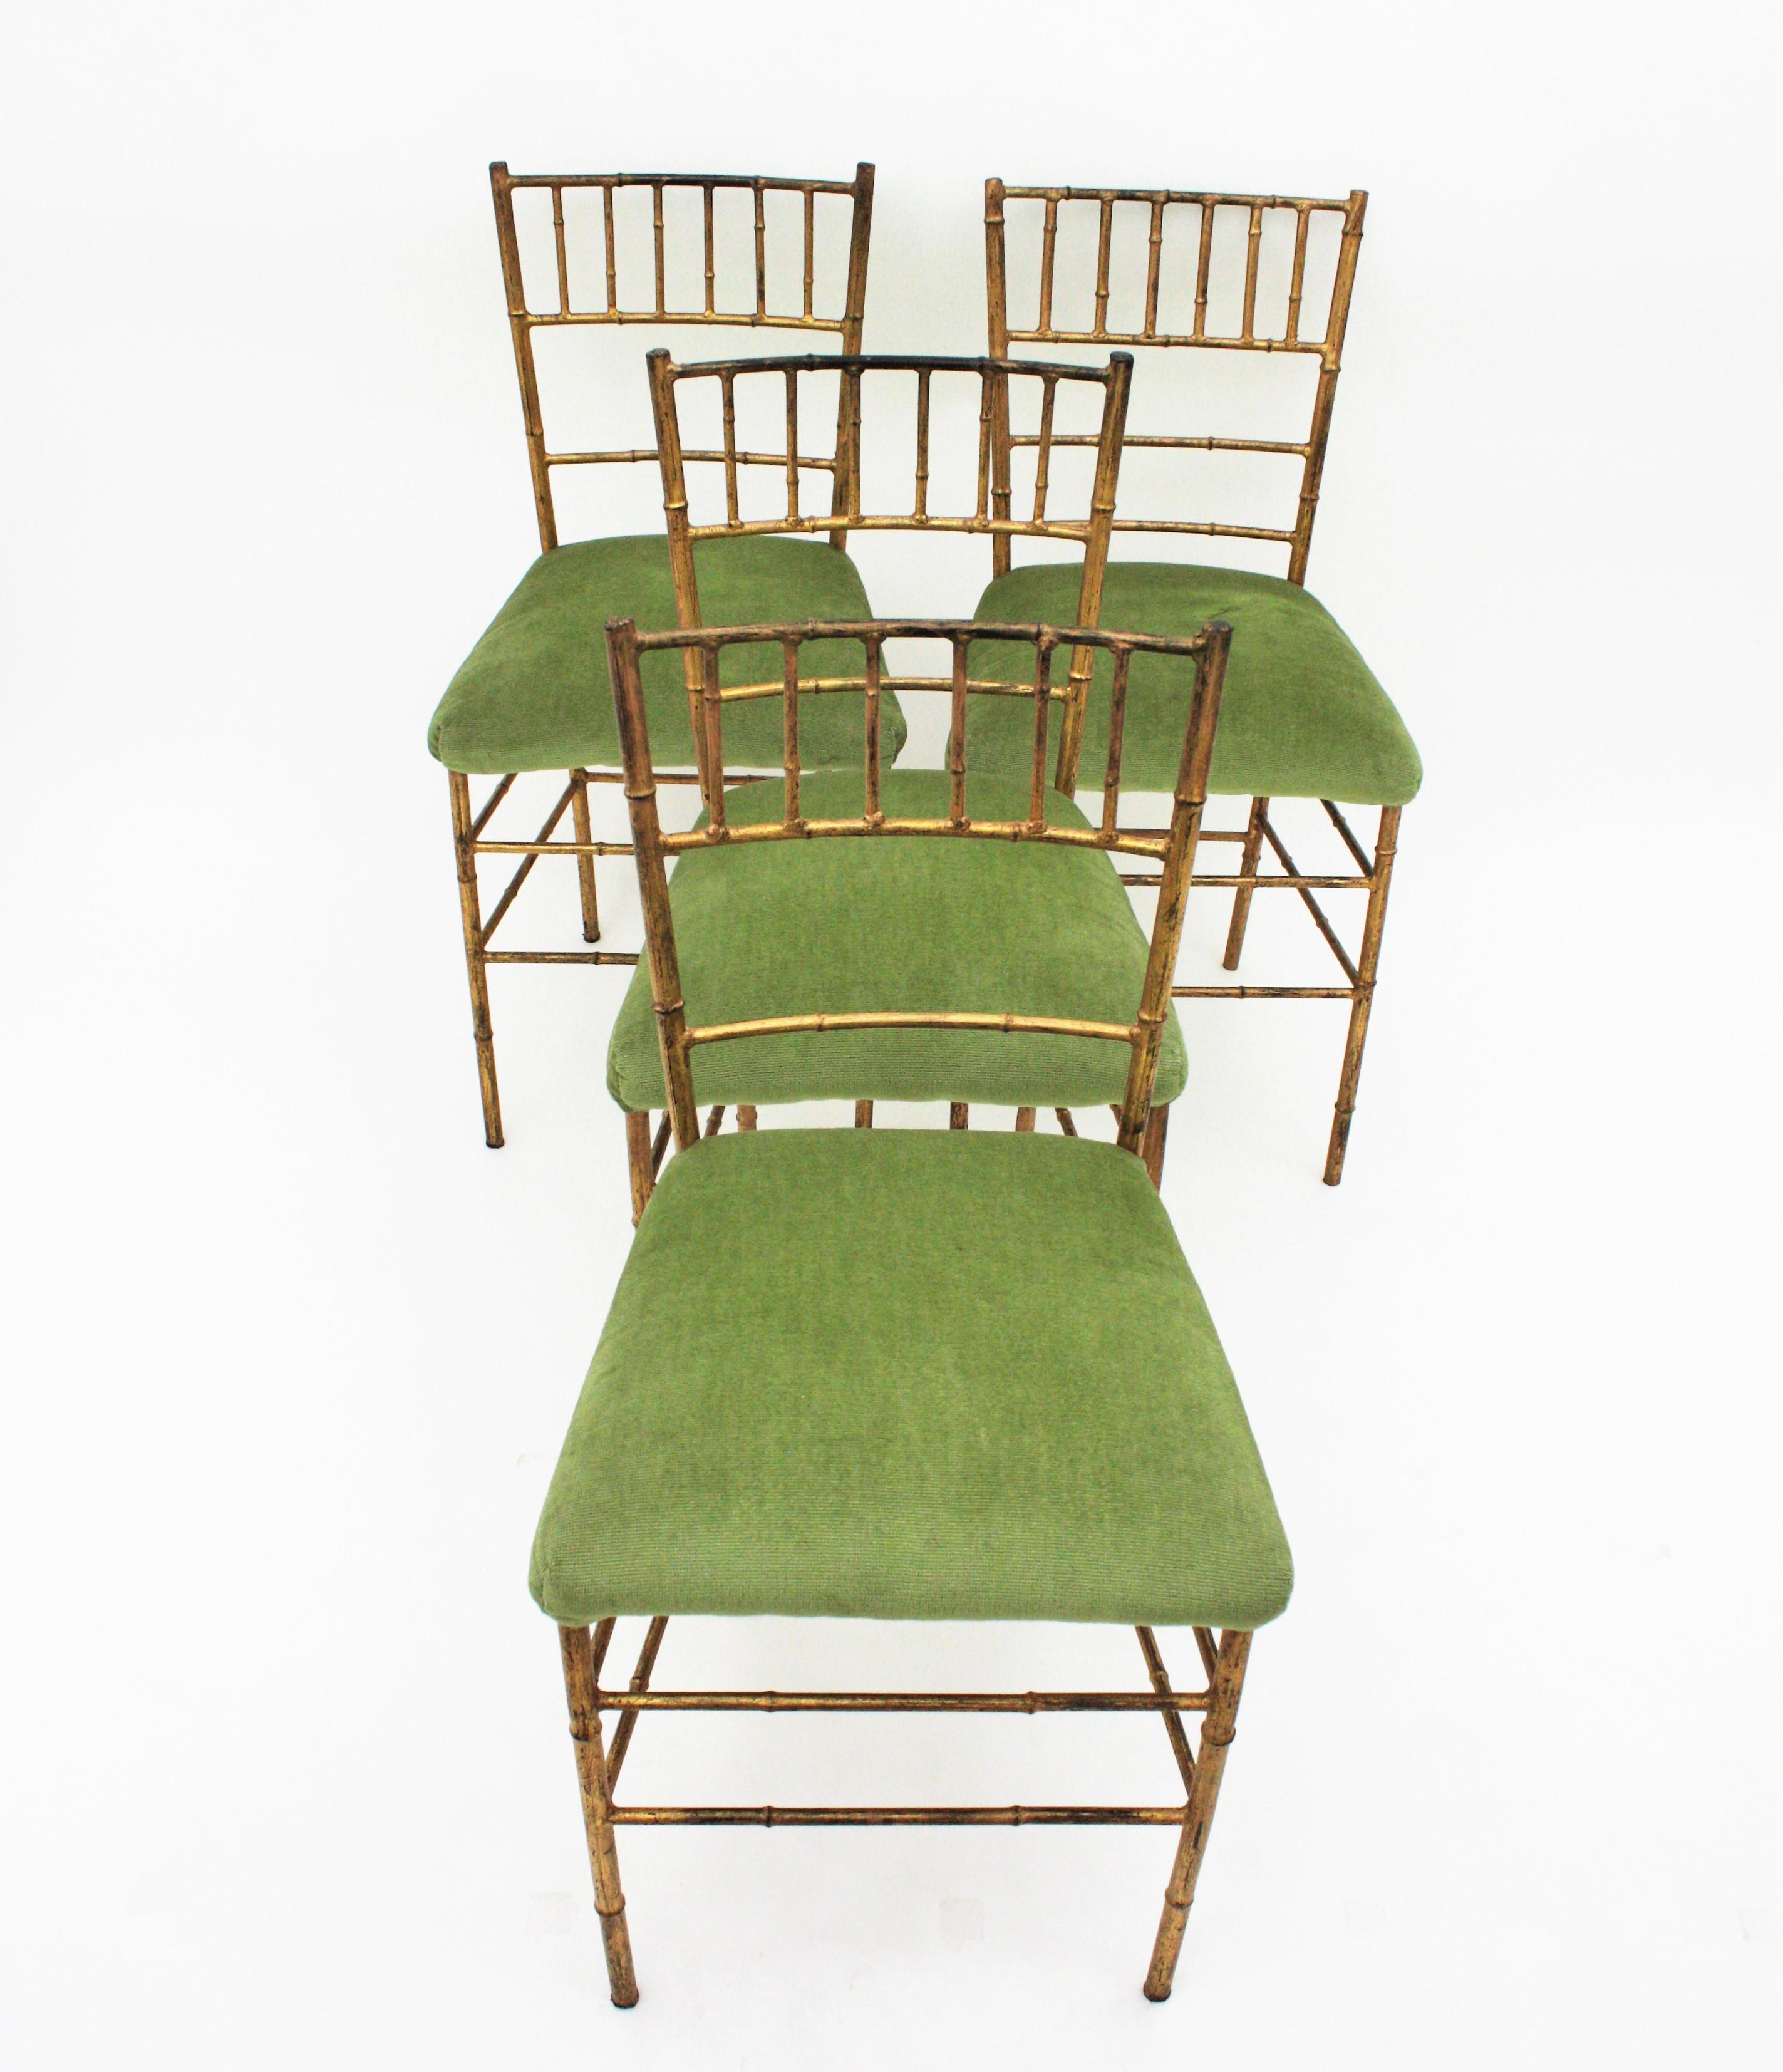 Set of four gold leaf gilt iron faux bamboo chairs, France, 1940s.
Nicely constructed. They have a beautiful aged patina showing their original gold leaf gilding
To be re-upholstered.
Priced and sold as a set.
Measures: 40 cm W x 82.5 cm H x 33